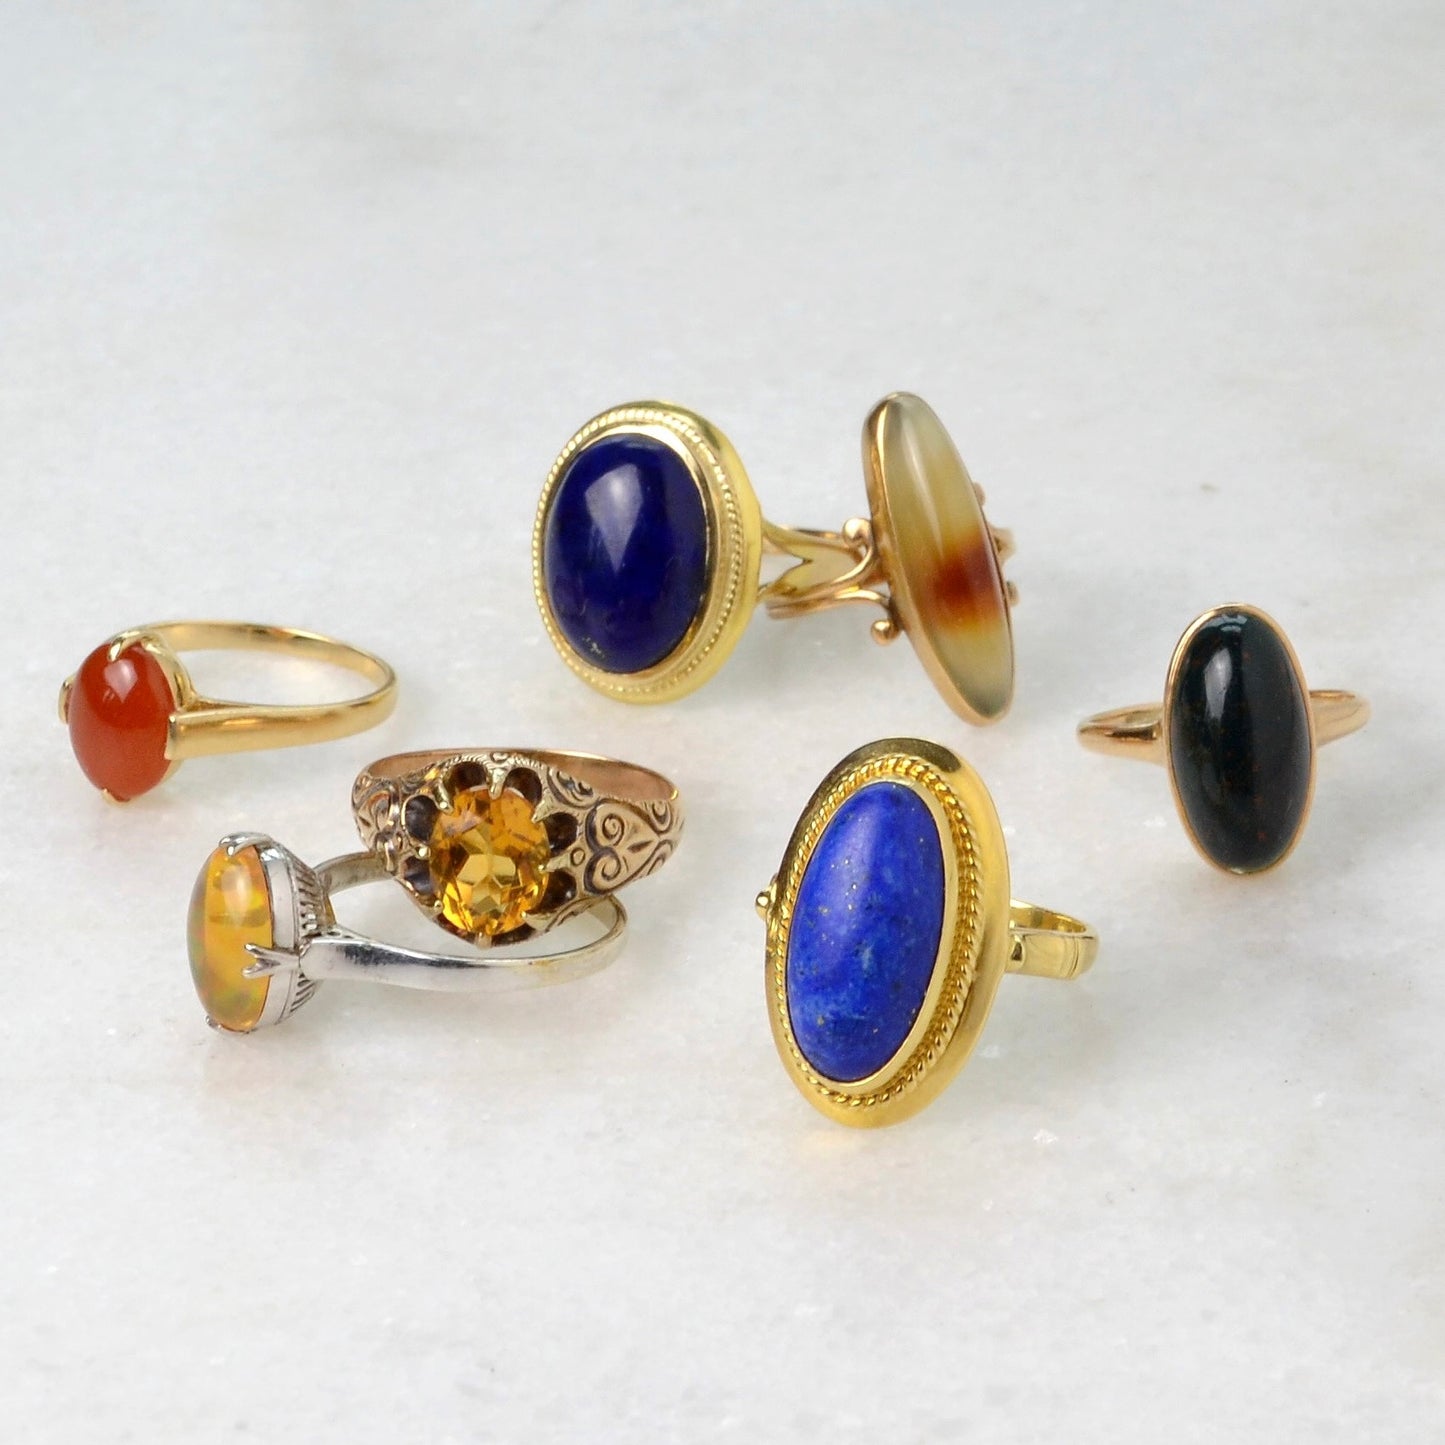 Antique Agate and Gold Ring